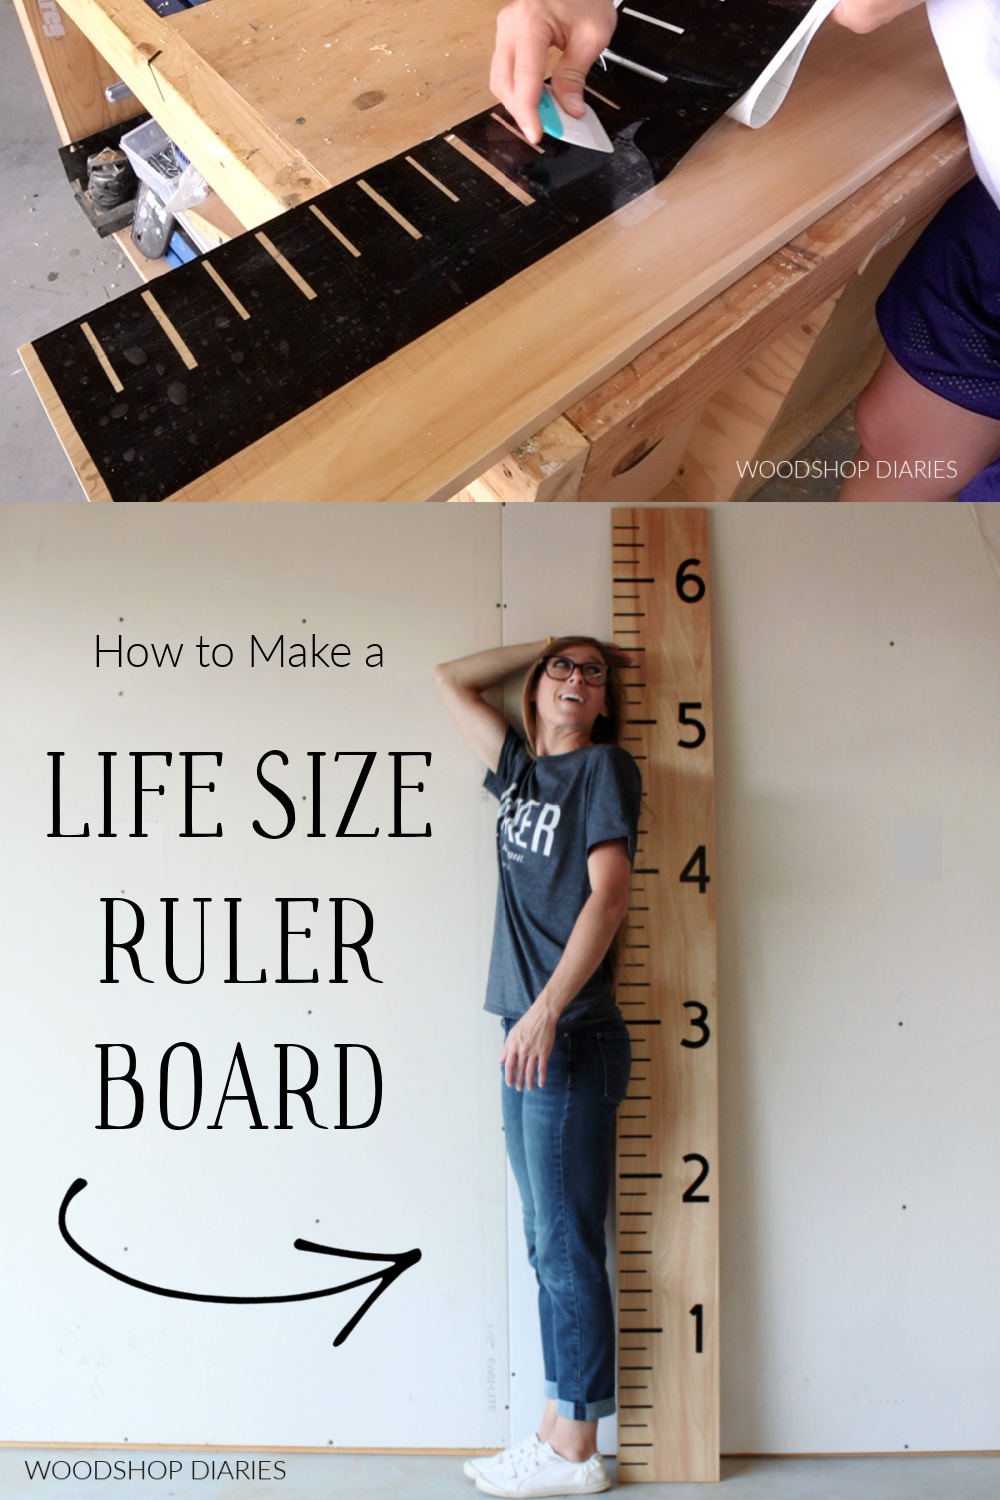 Pinterest collage showing applying cricut vinyl stencil at top and Shara Woodshop Diaries standing next to life size ruler board at bottom with text "how to make a life size ruler board"